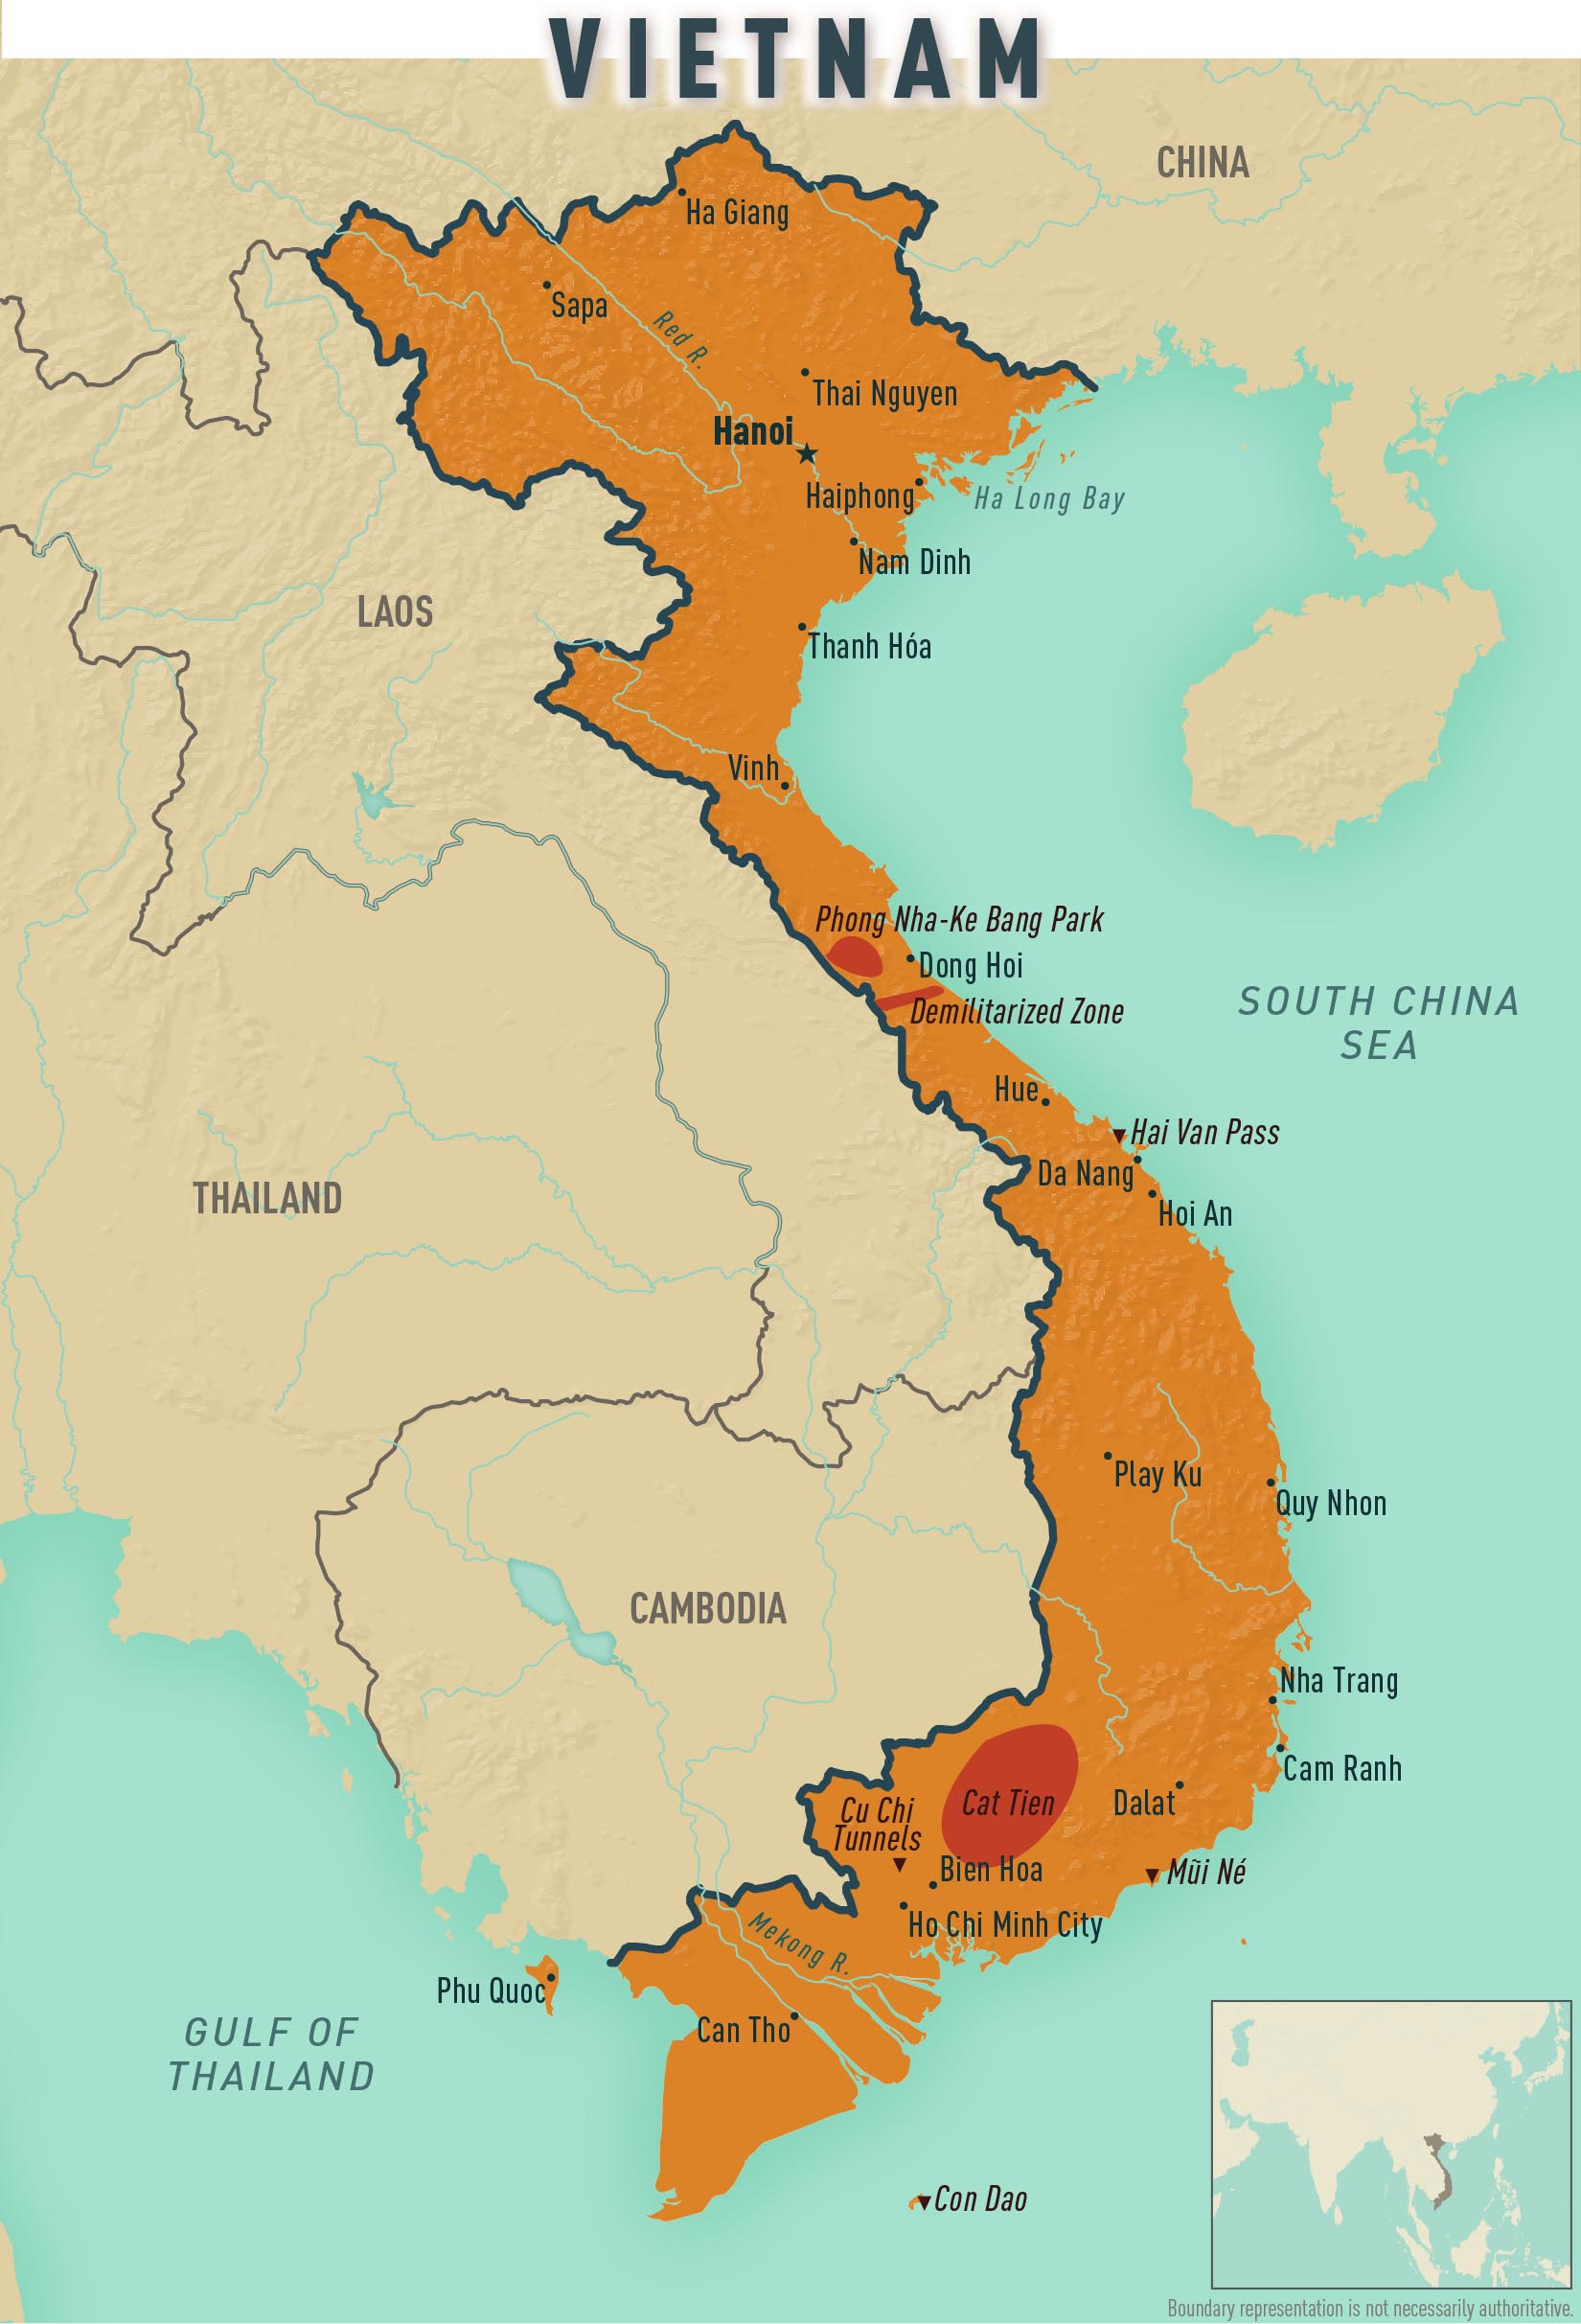 cdc travel guidelines for vietnam